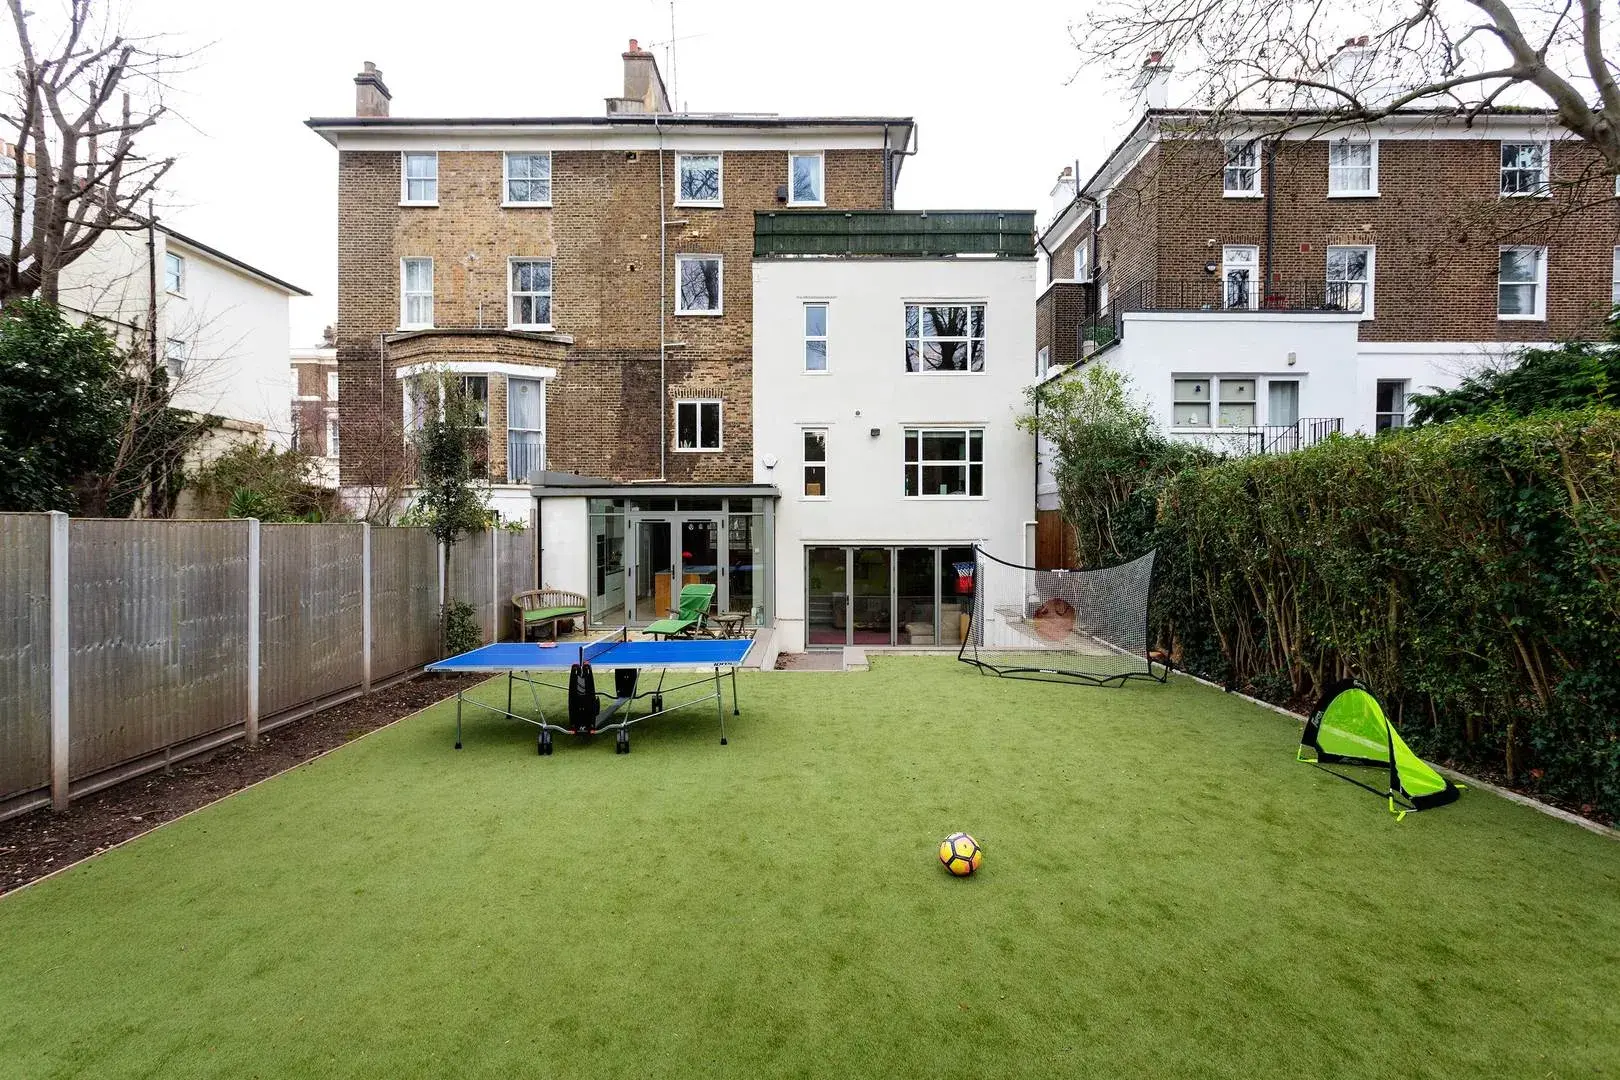 Oval Road, holiday home in Primrose Hill, London